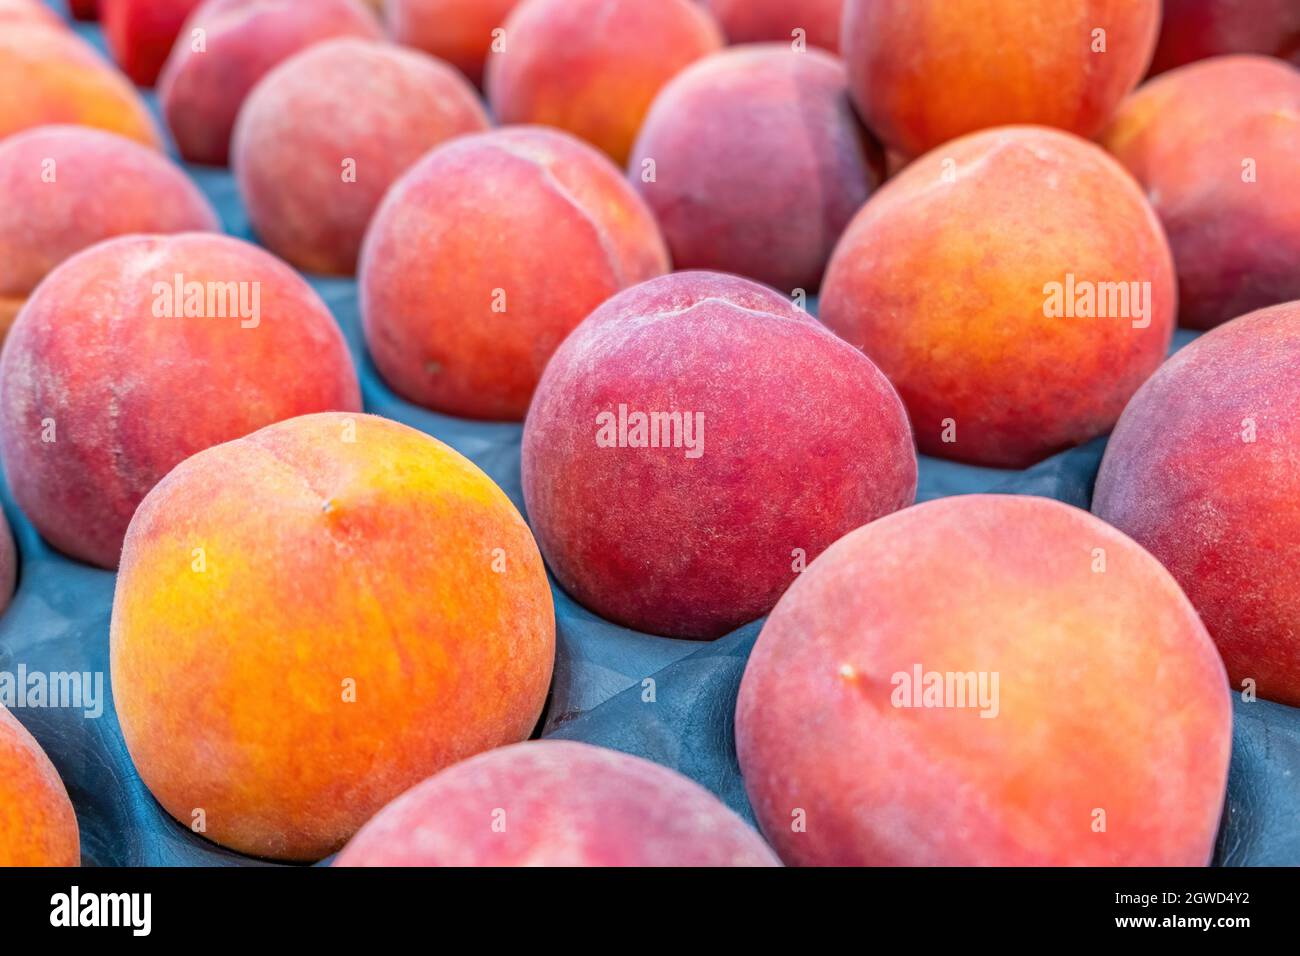 Rows Of Vivid Red And Orange Peaches With Shallow Focus Stock Photo